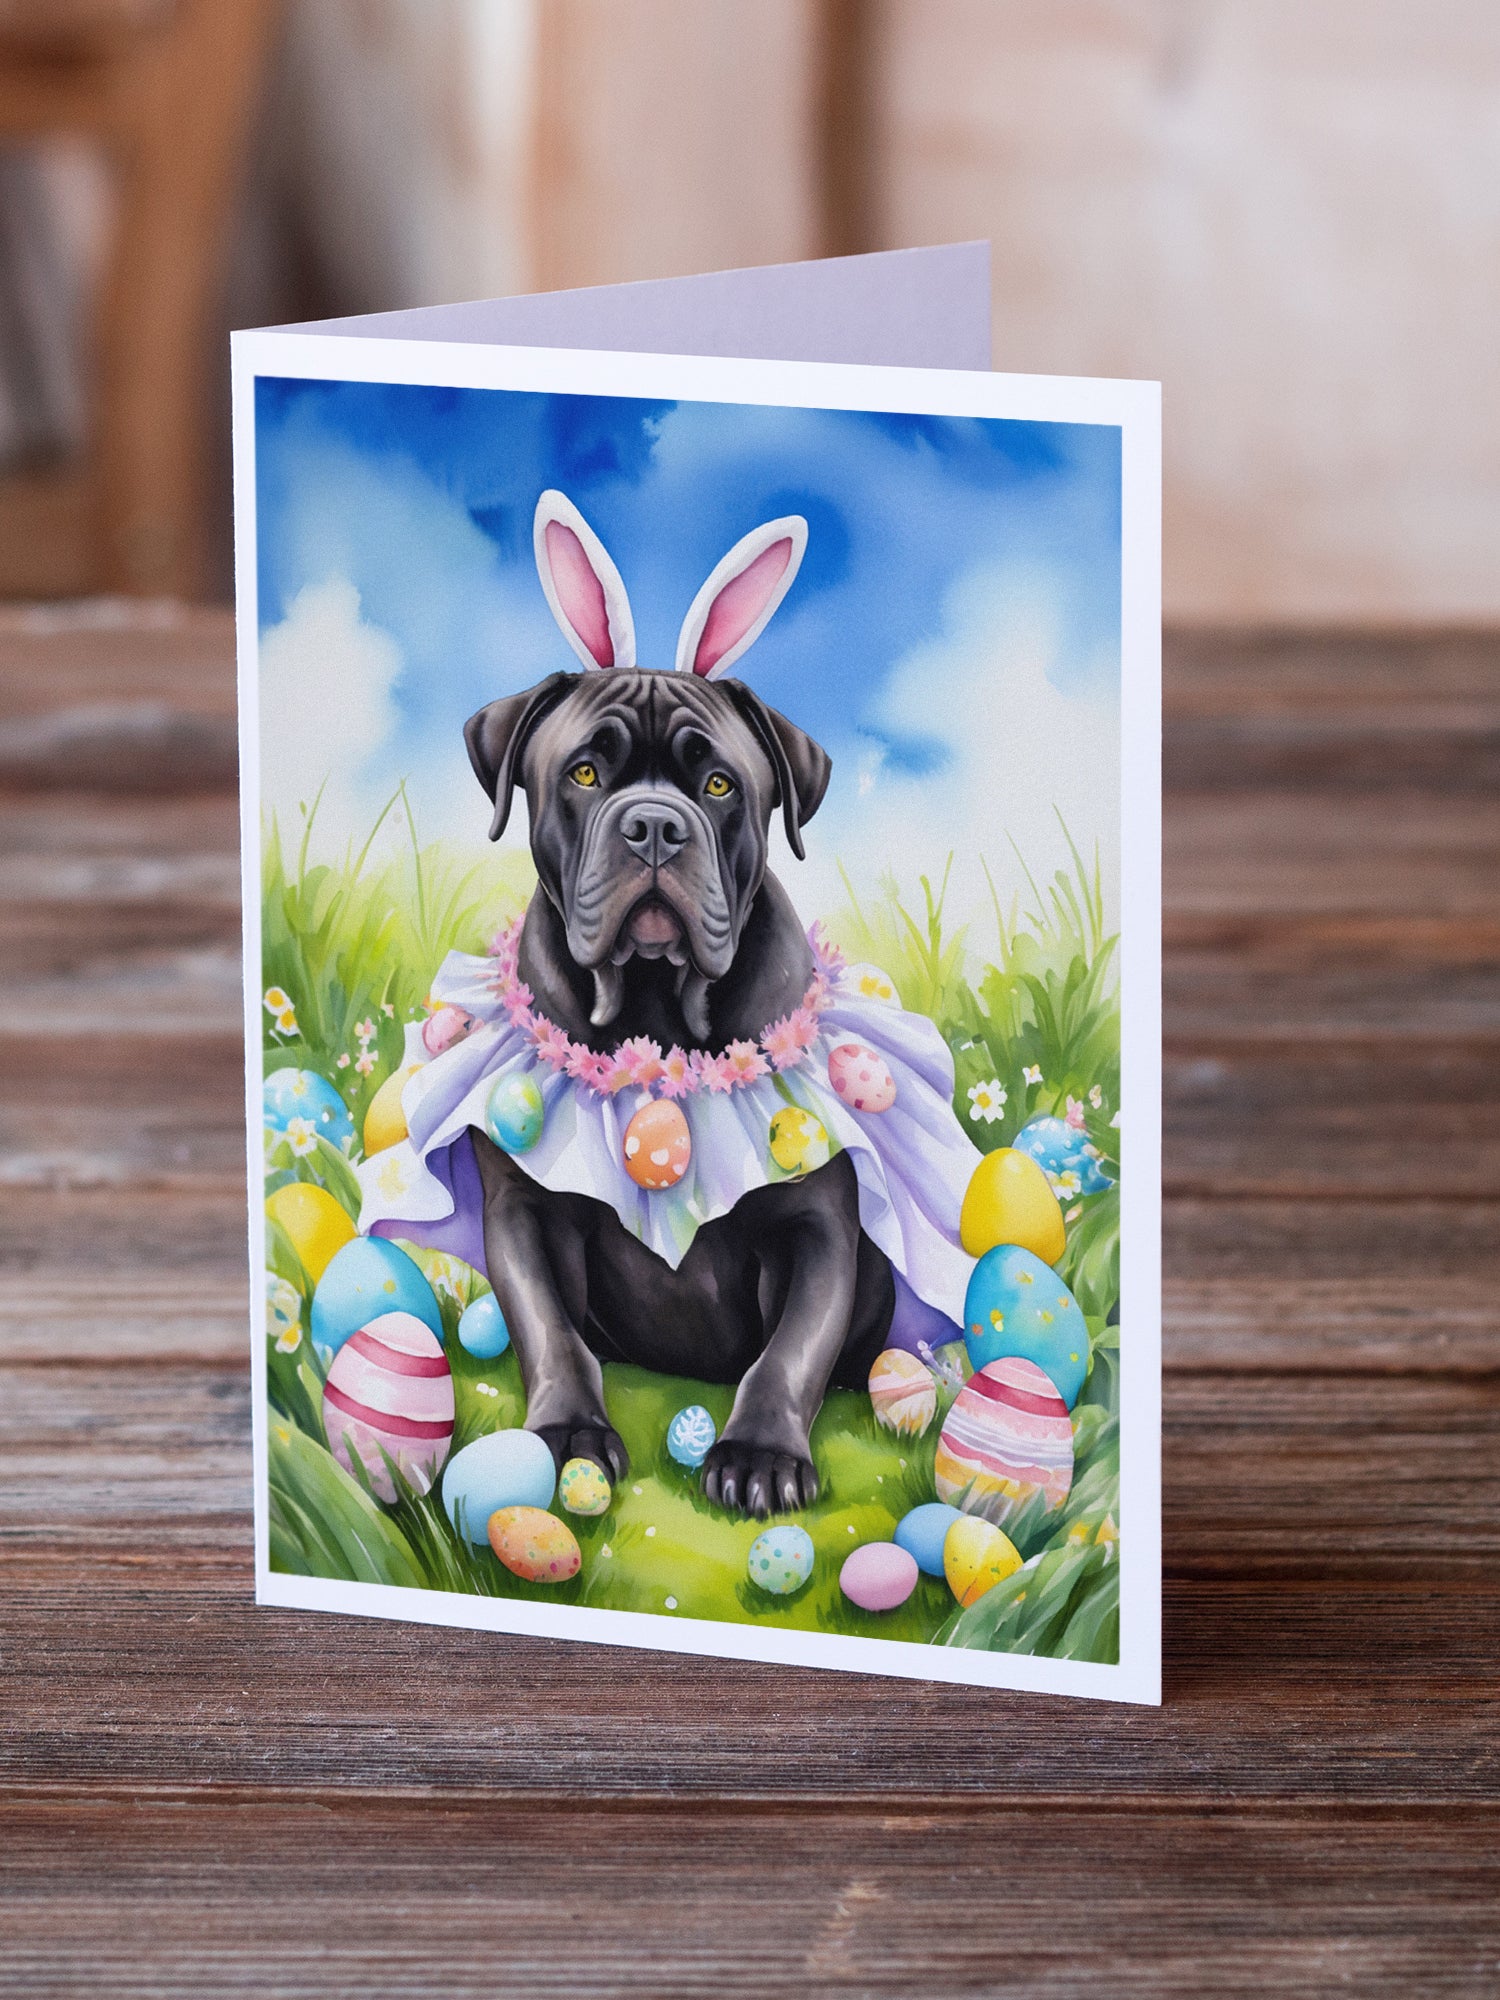 Cane Corso Easter Egg Hunt Greeting Cards Pack of 8